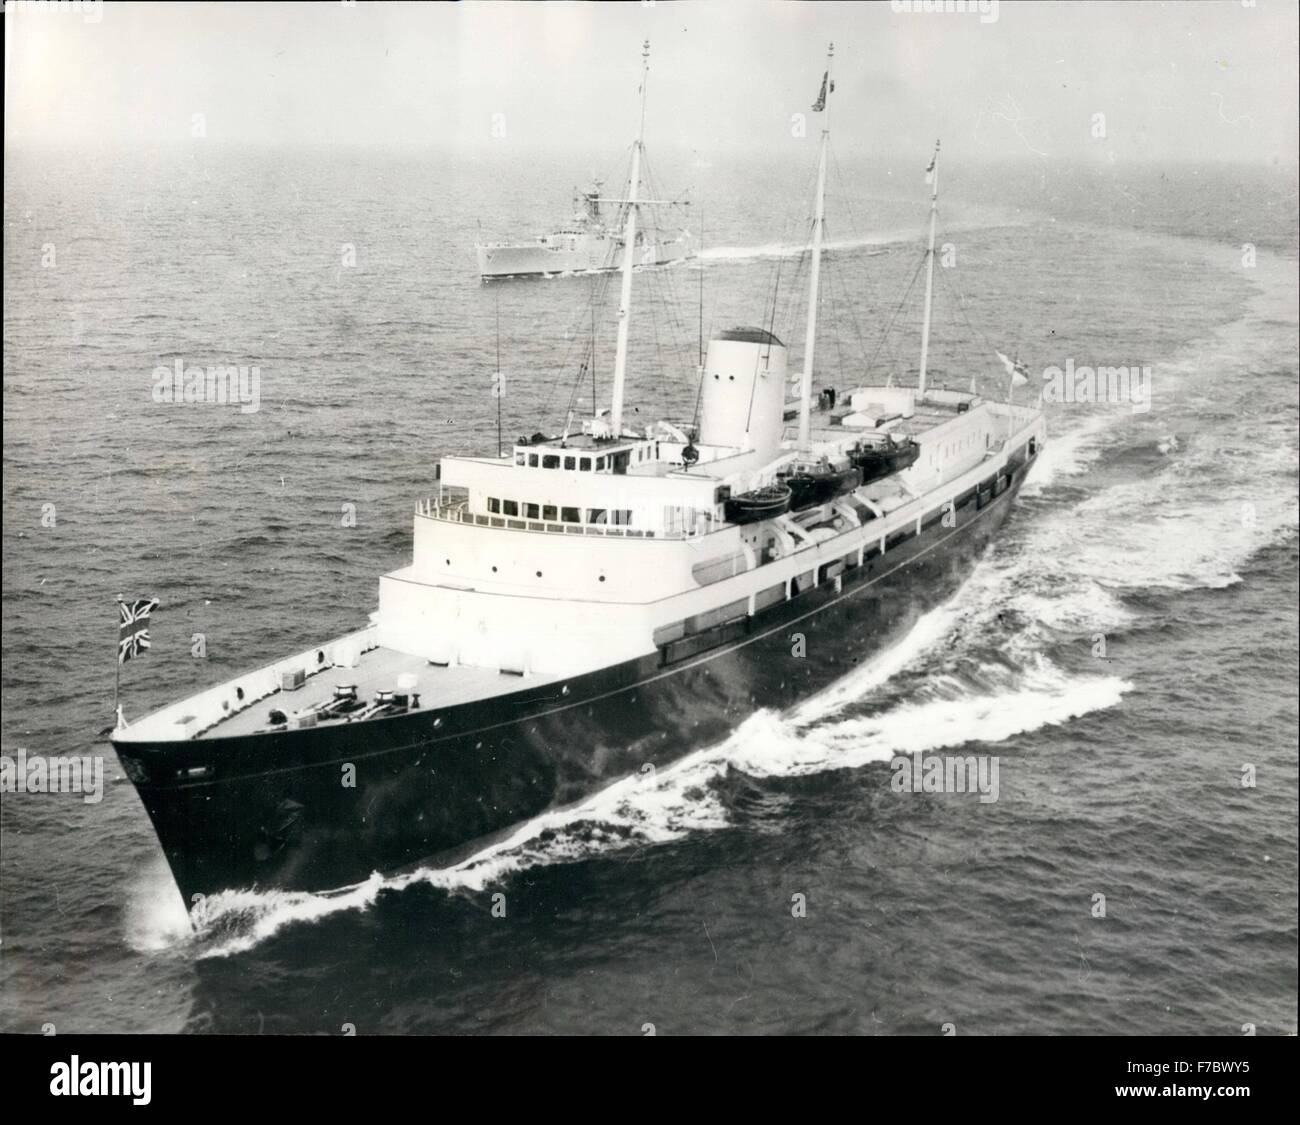 1962 - Princess Anne To Have Honeymoon Cruise In The Royal Yacht Britannia: Photo Shows View of the Royal Yacht Britannia in which Princess Anne and Capt. Mark Philips will have a three-week honeymoon cruise in the Caribbean. © Keystone Pictures USA/ZUMAPRESS.com/Alamy Live News Stock Photo